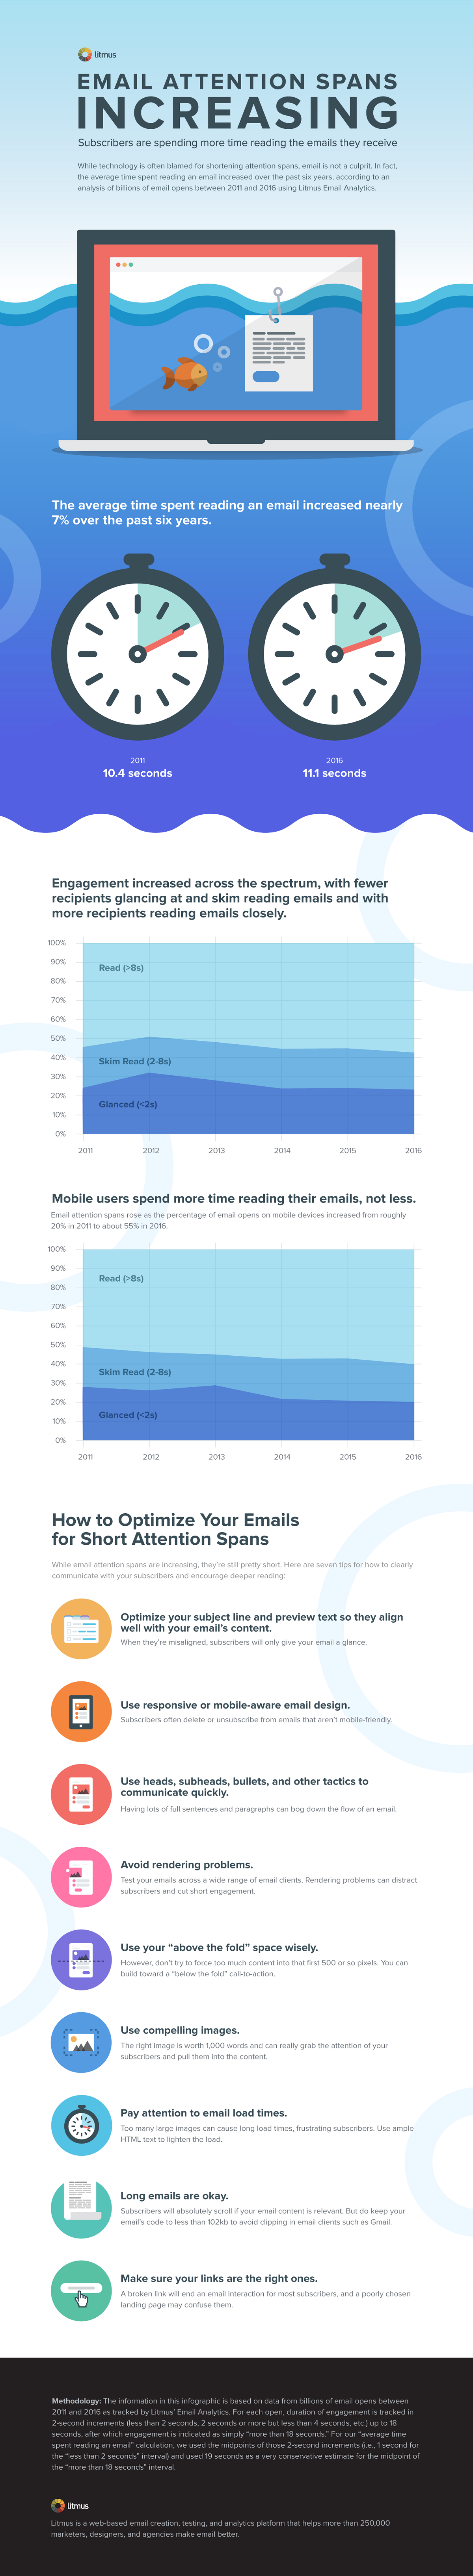 Email Attention Spans Increasing #infographic